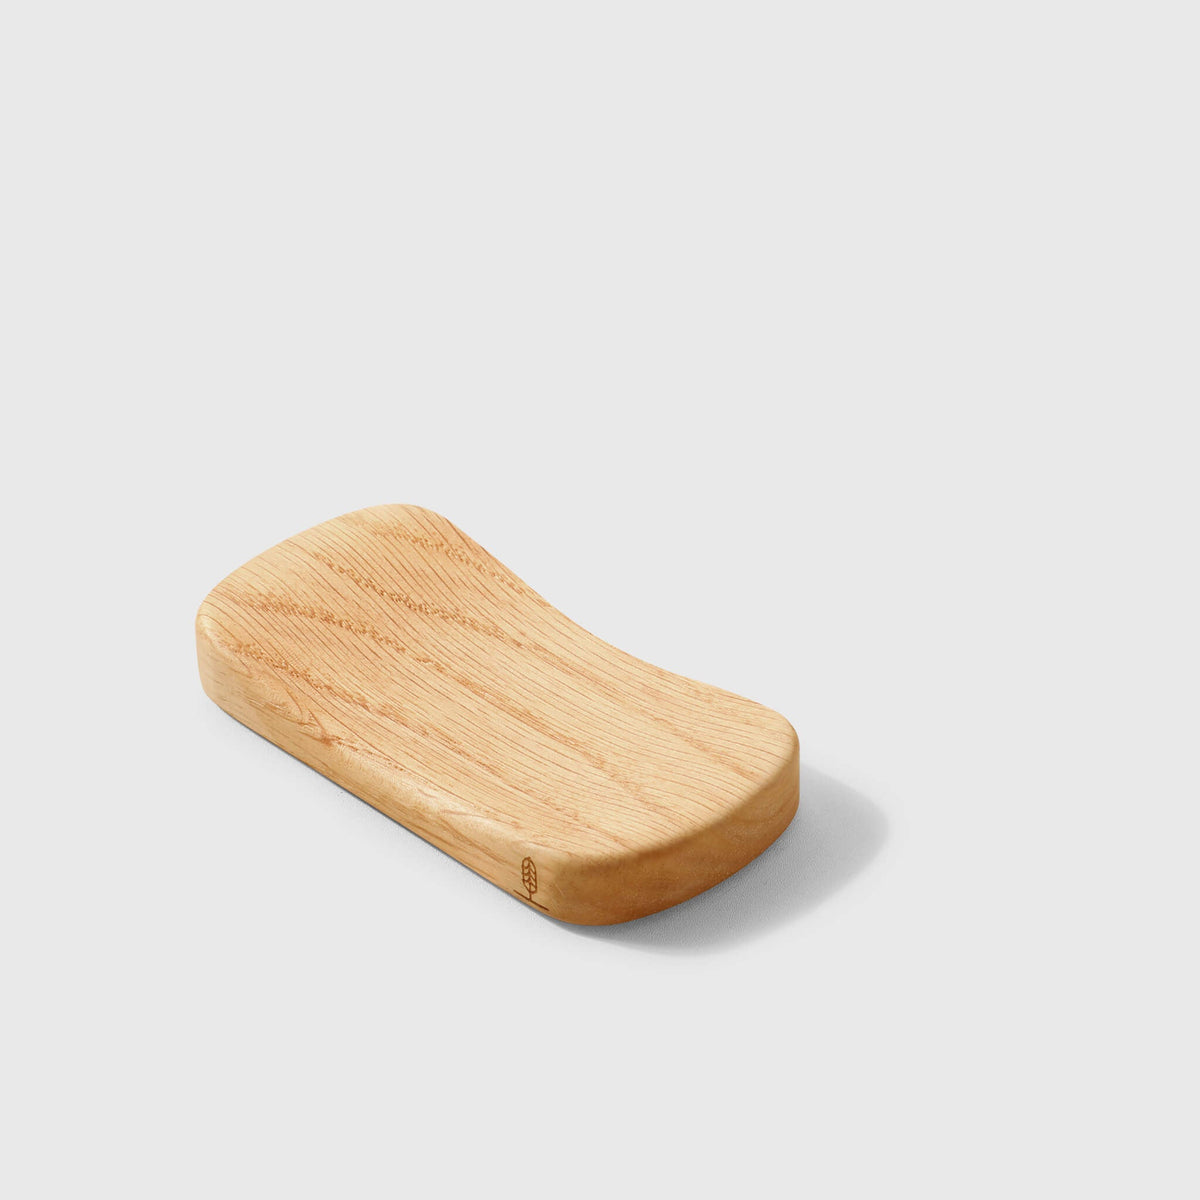 Red-Oak-Wooden-Mouse-Wrist-Pad